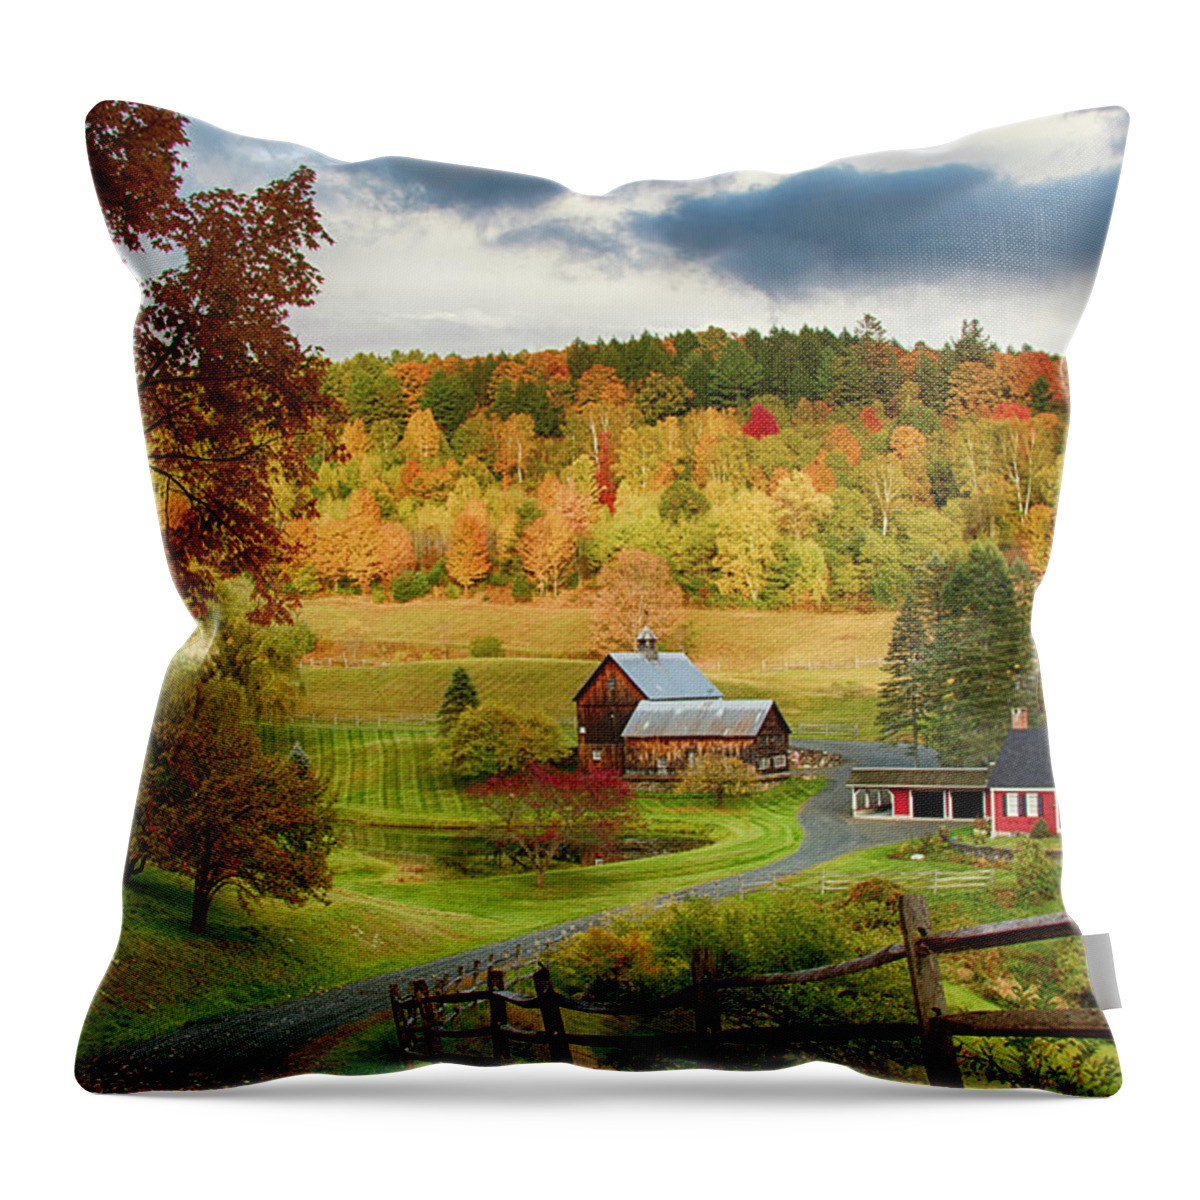 Sleepy Hollow Farm Throw Pillow featuring the photograph Vermont Sleepy Hollow in fall foliage by Jeff Folger